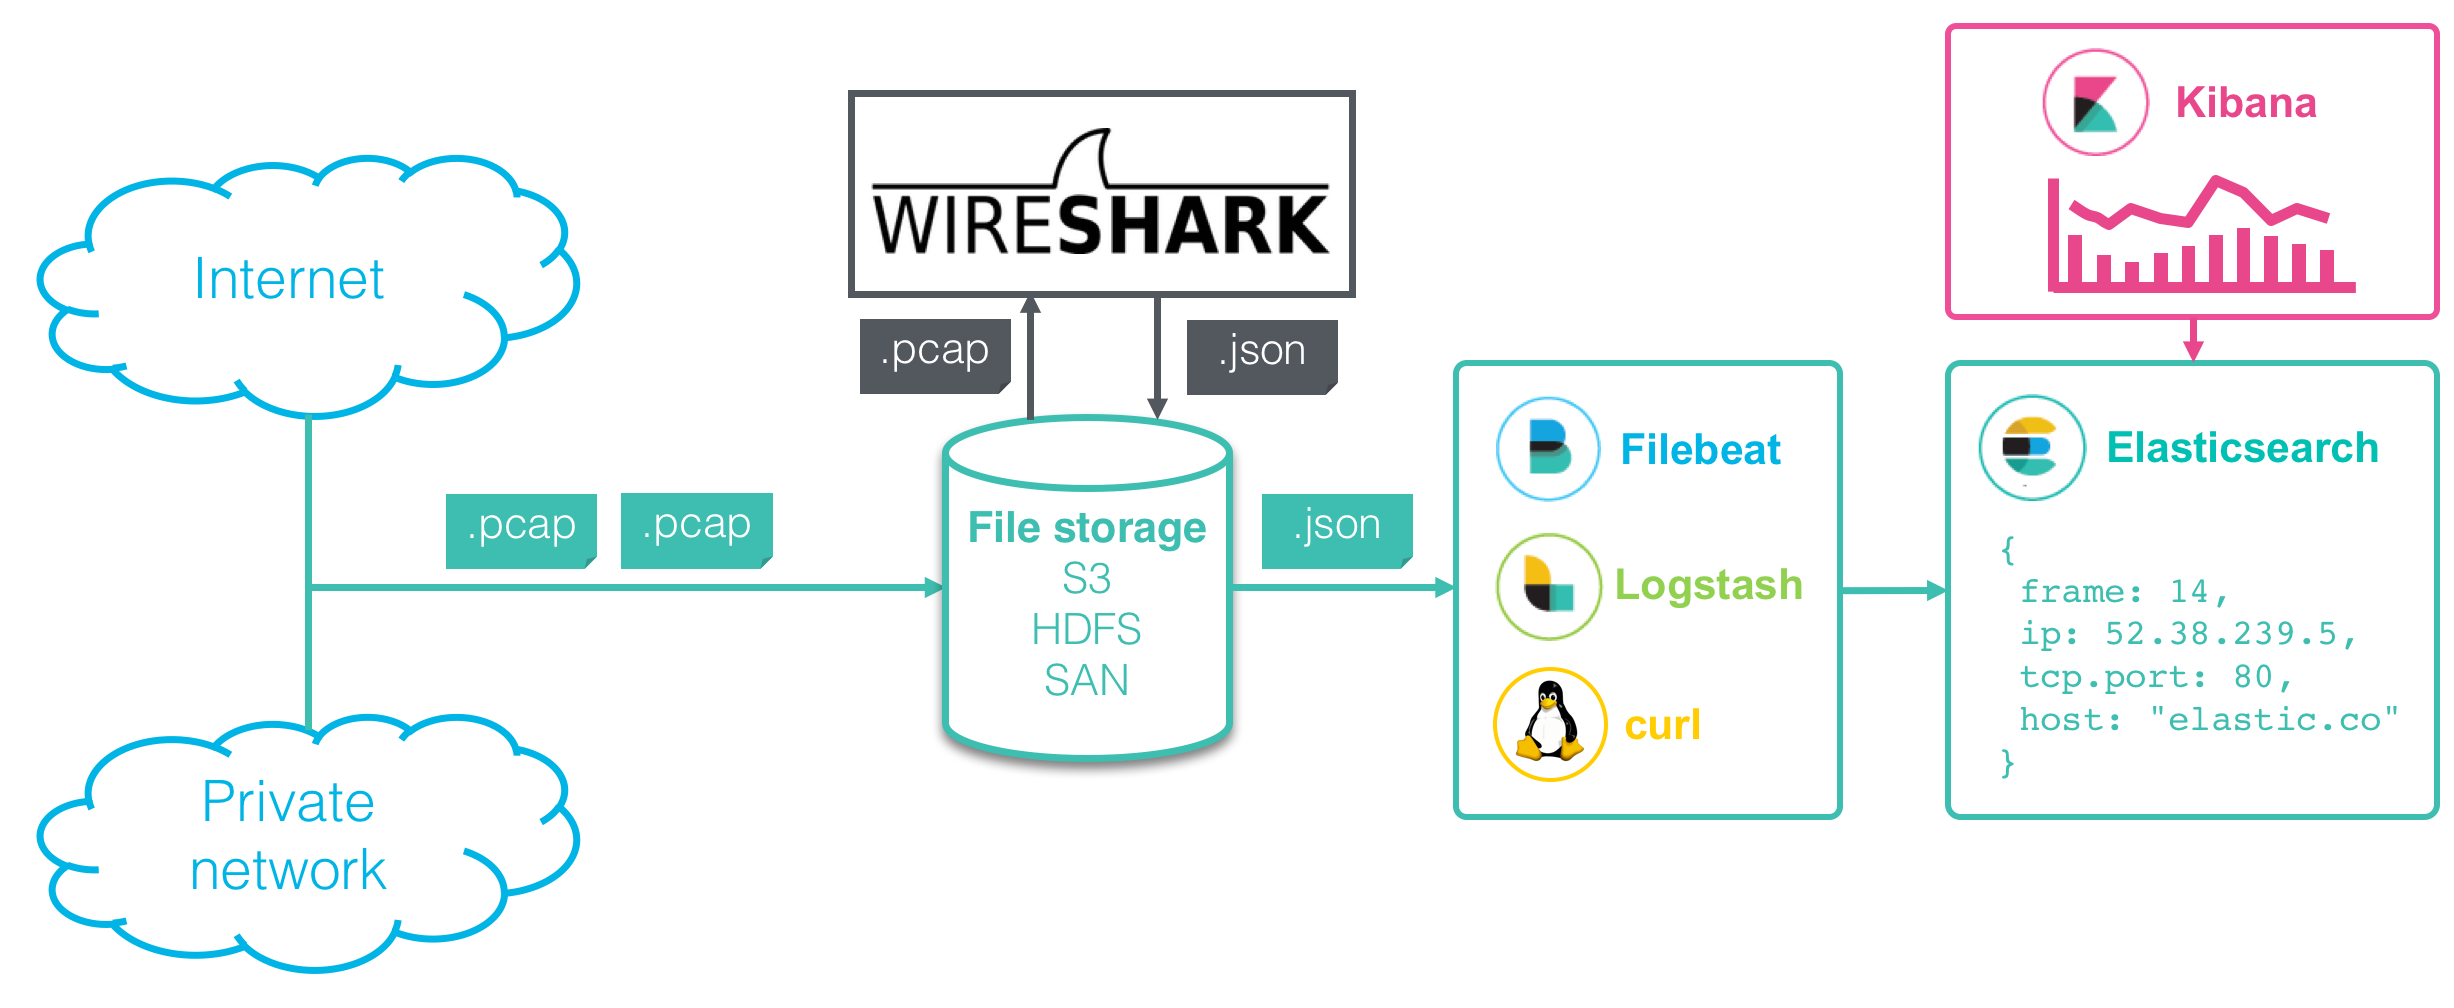 Network packet analysis pipeline with Wireshark and the Elastic Stack